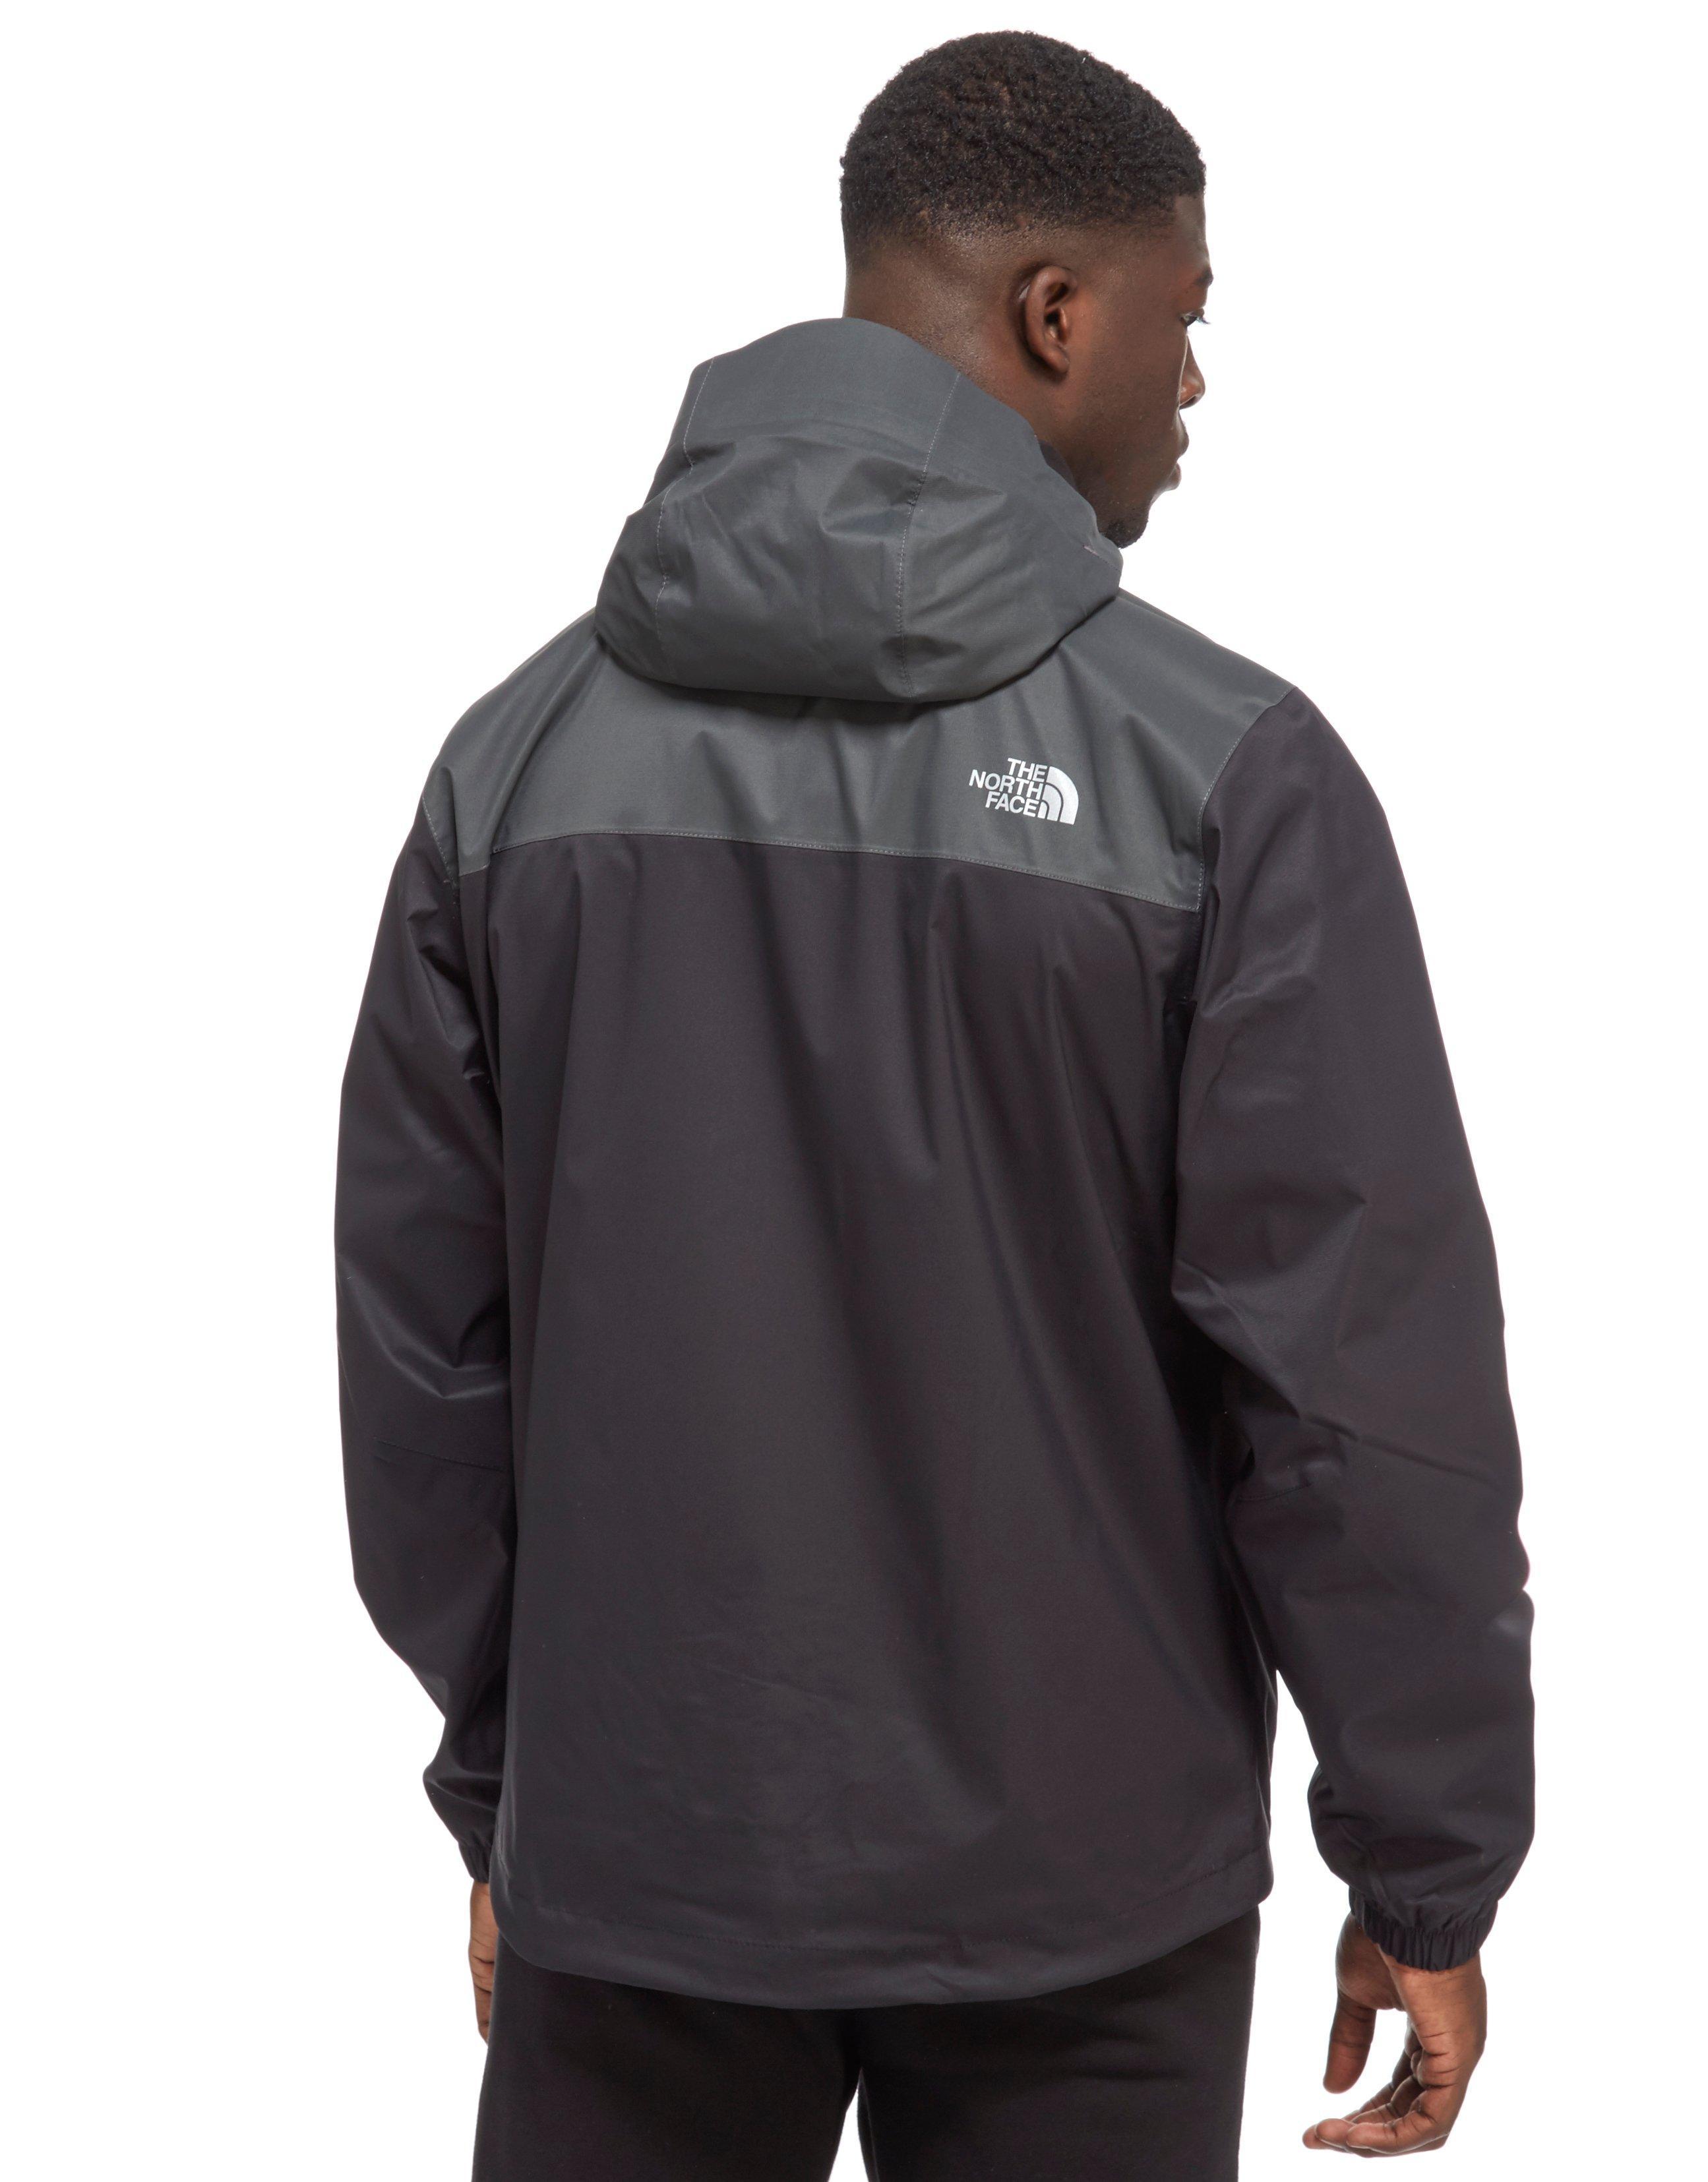 The North Face Synthetic Ost Colour Block Jacket in Black/Grey (Black) for  Men - Lyst